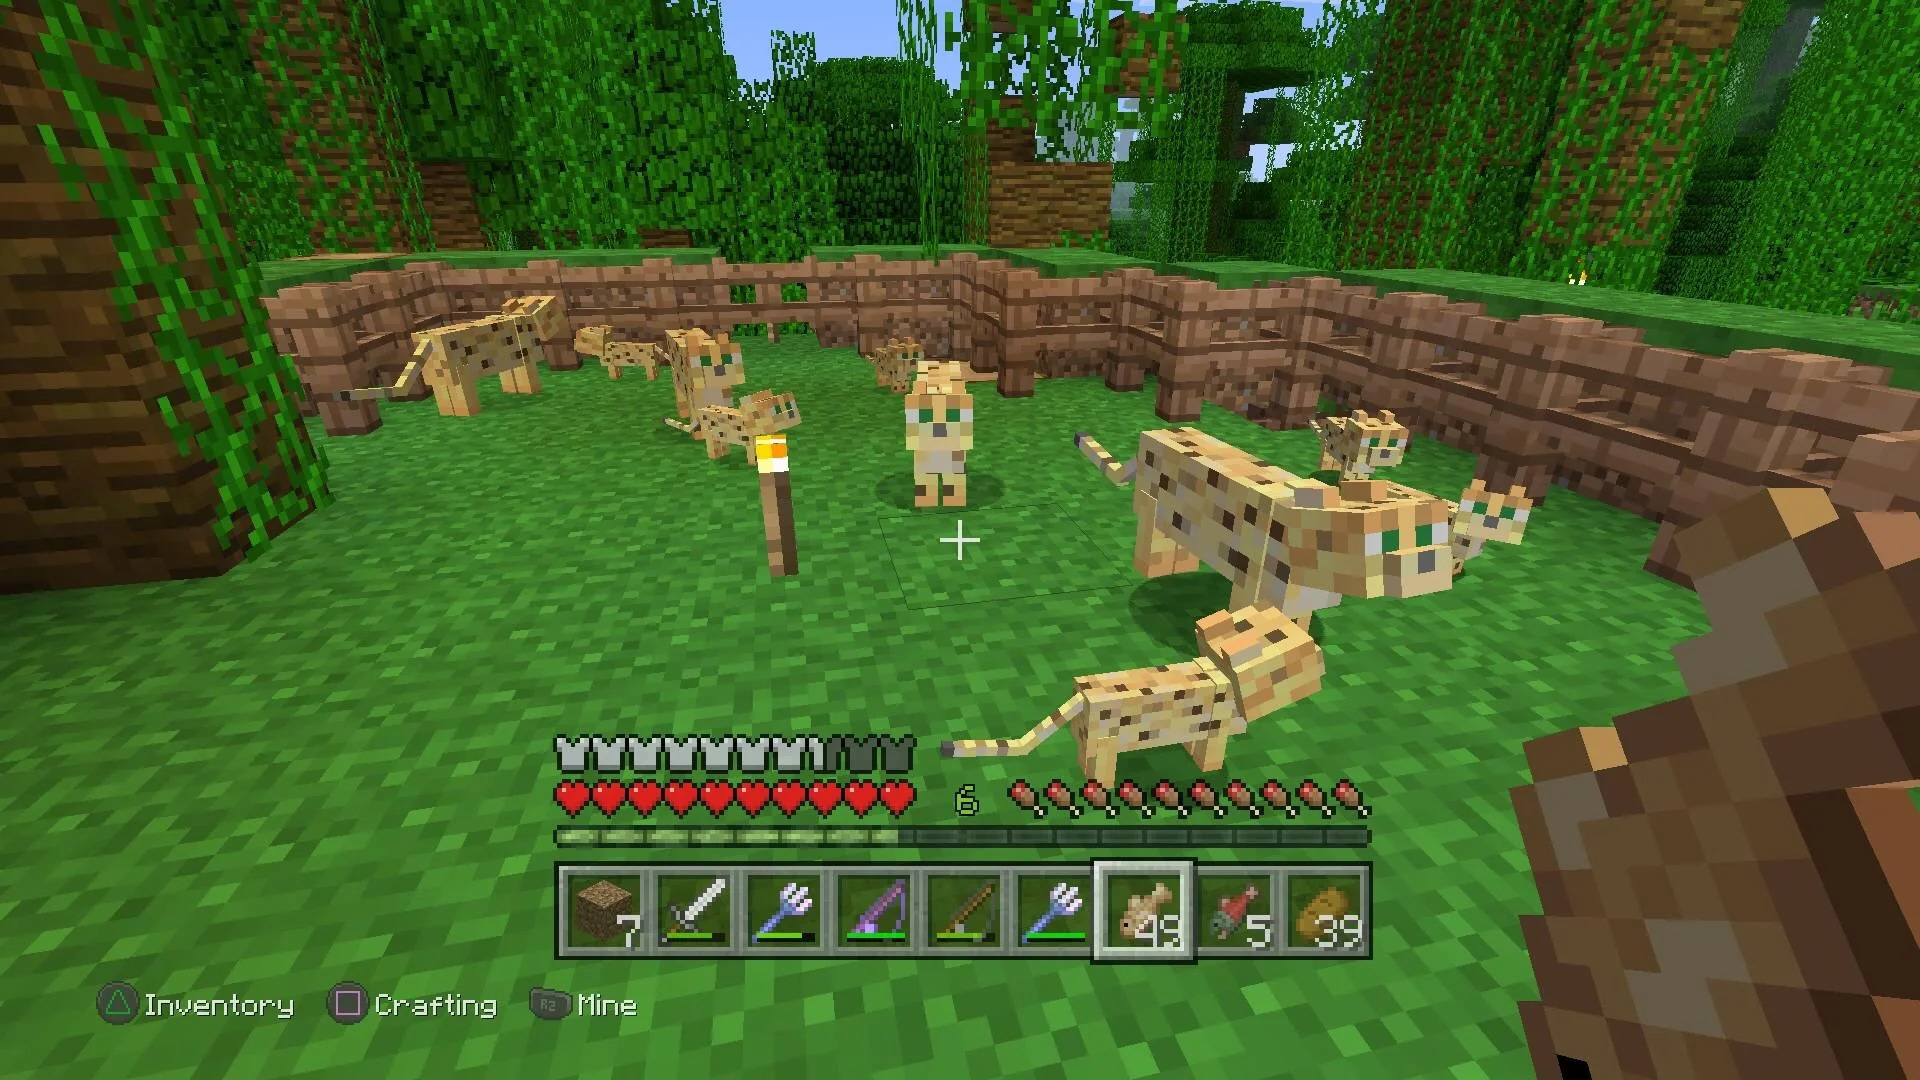 What You Need to Tame Ocelots?